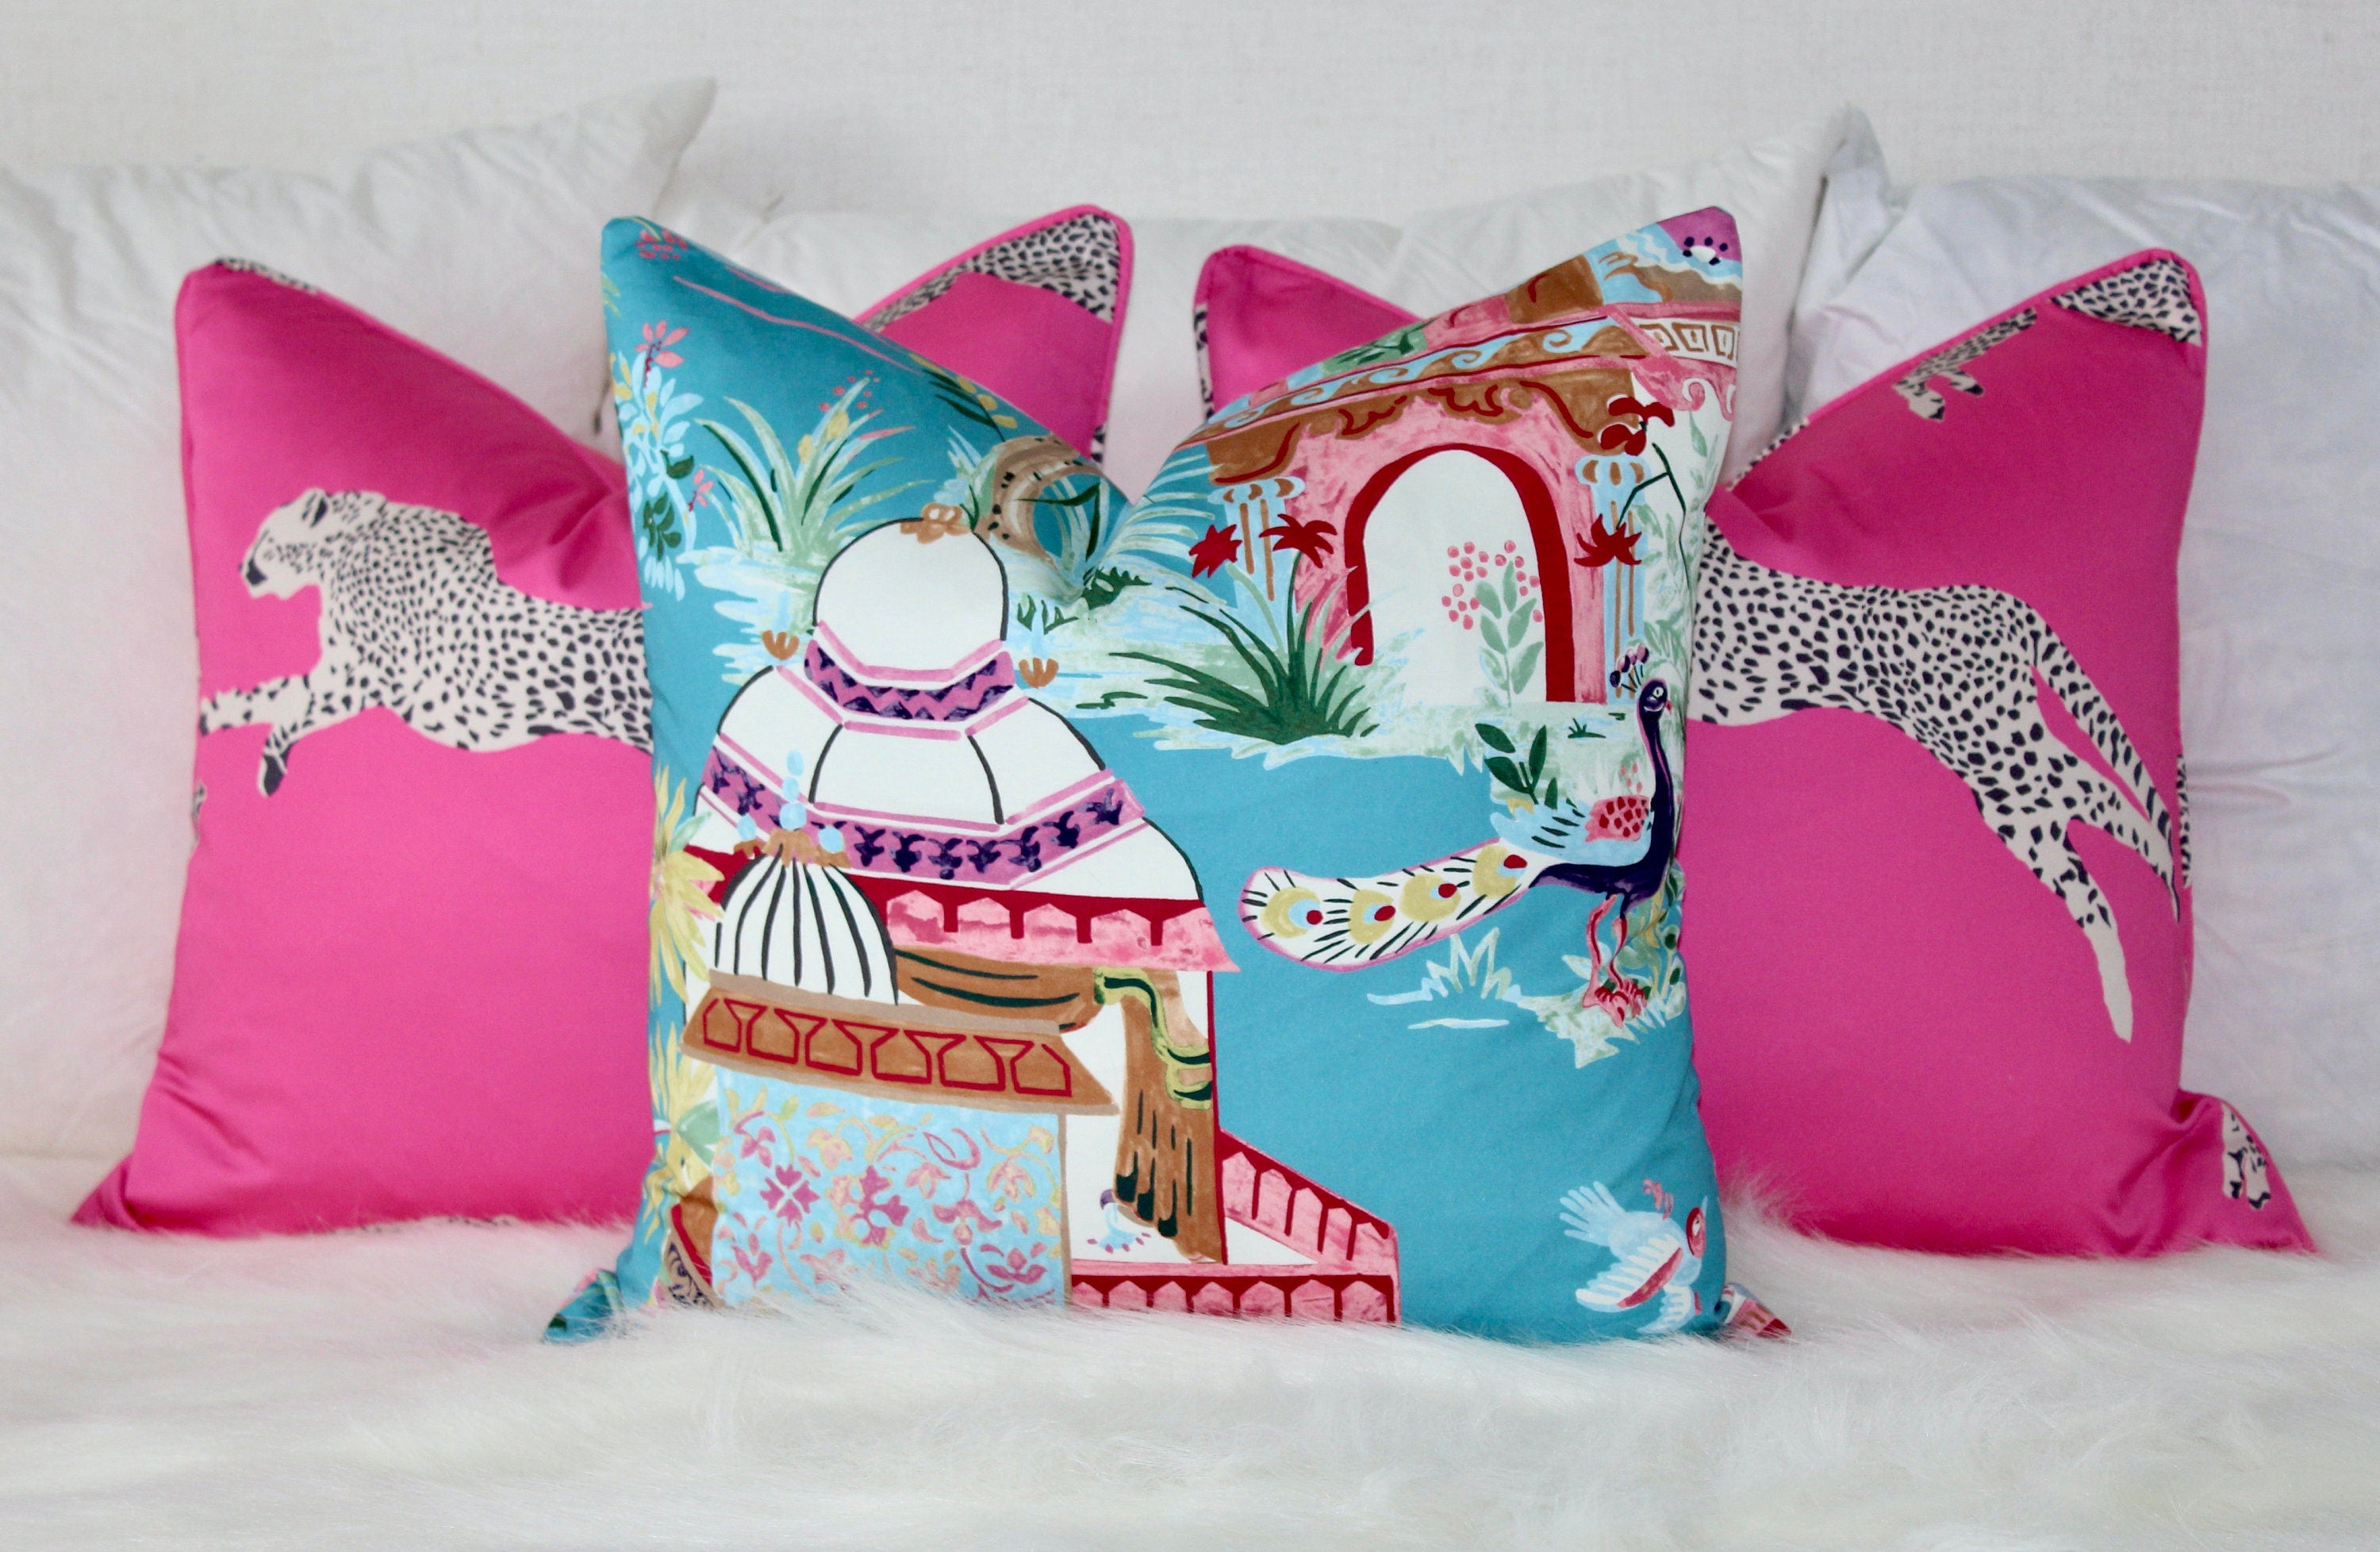 Mystic Garden Pillow Teal. Lumbar Cushion Cover, Turquoise Euro Sham, Designer Pillow in Pink and Teal, Accent Cushion, Eclectic Toss Pillow